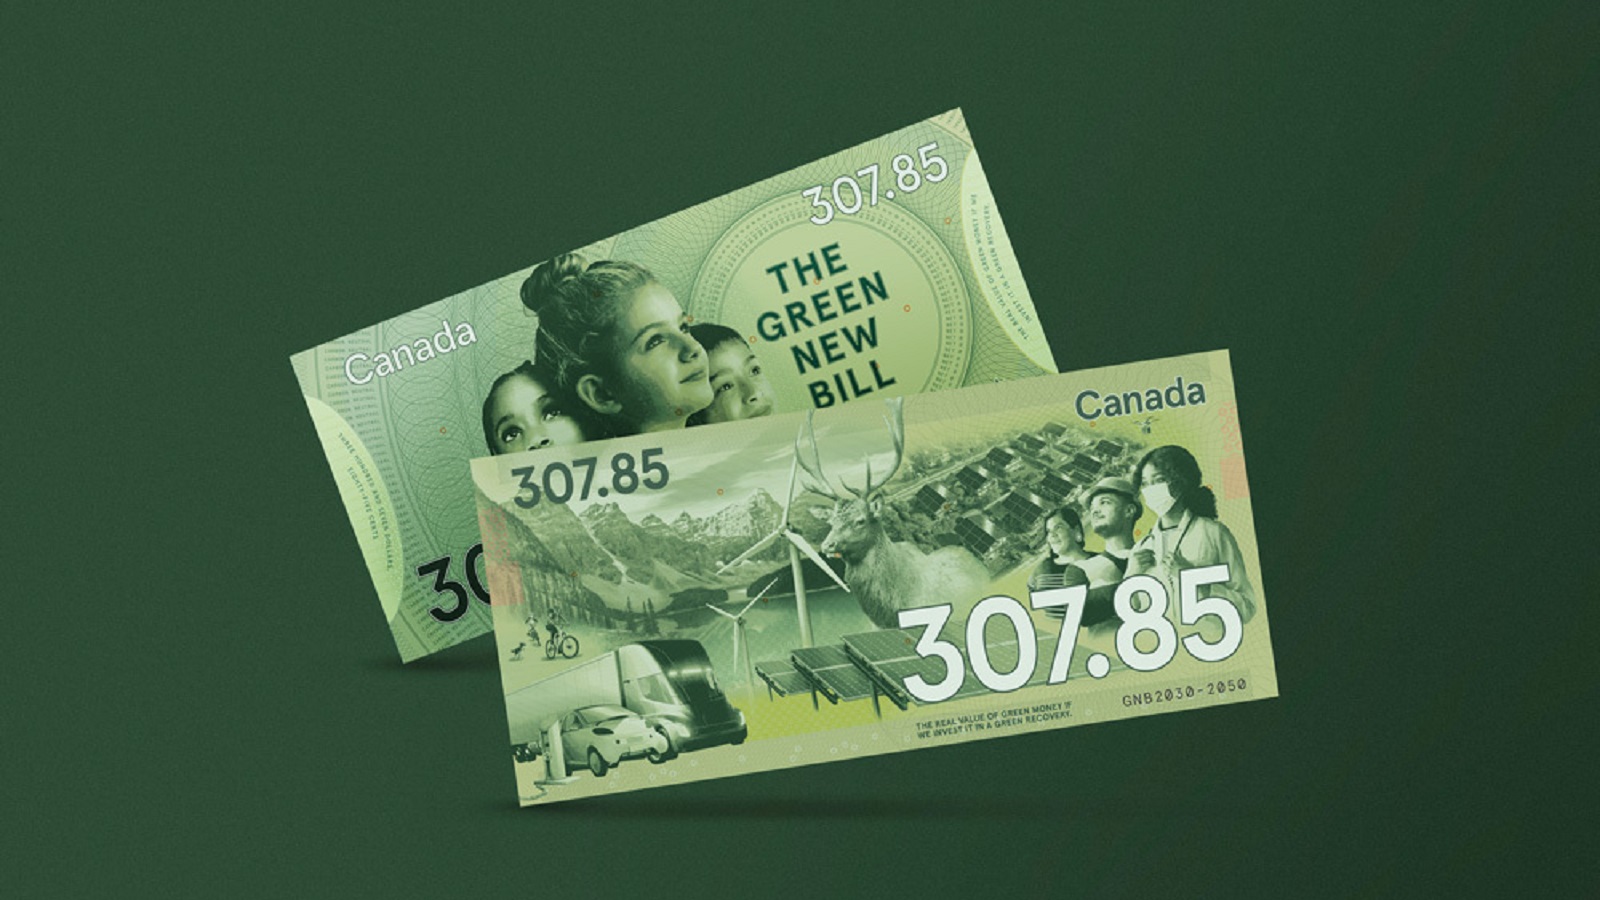 Canadian $20 Bill Is Worth $307.85, if Invested Wisely